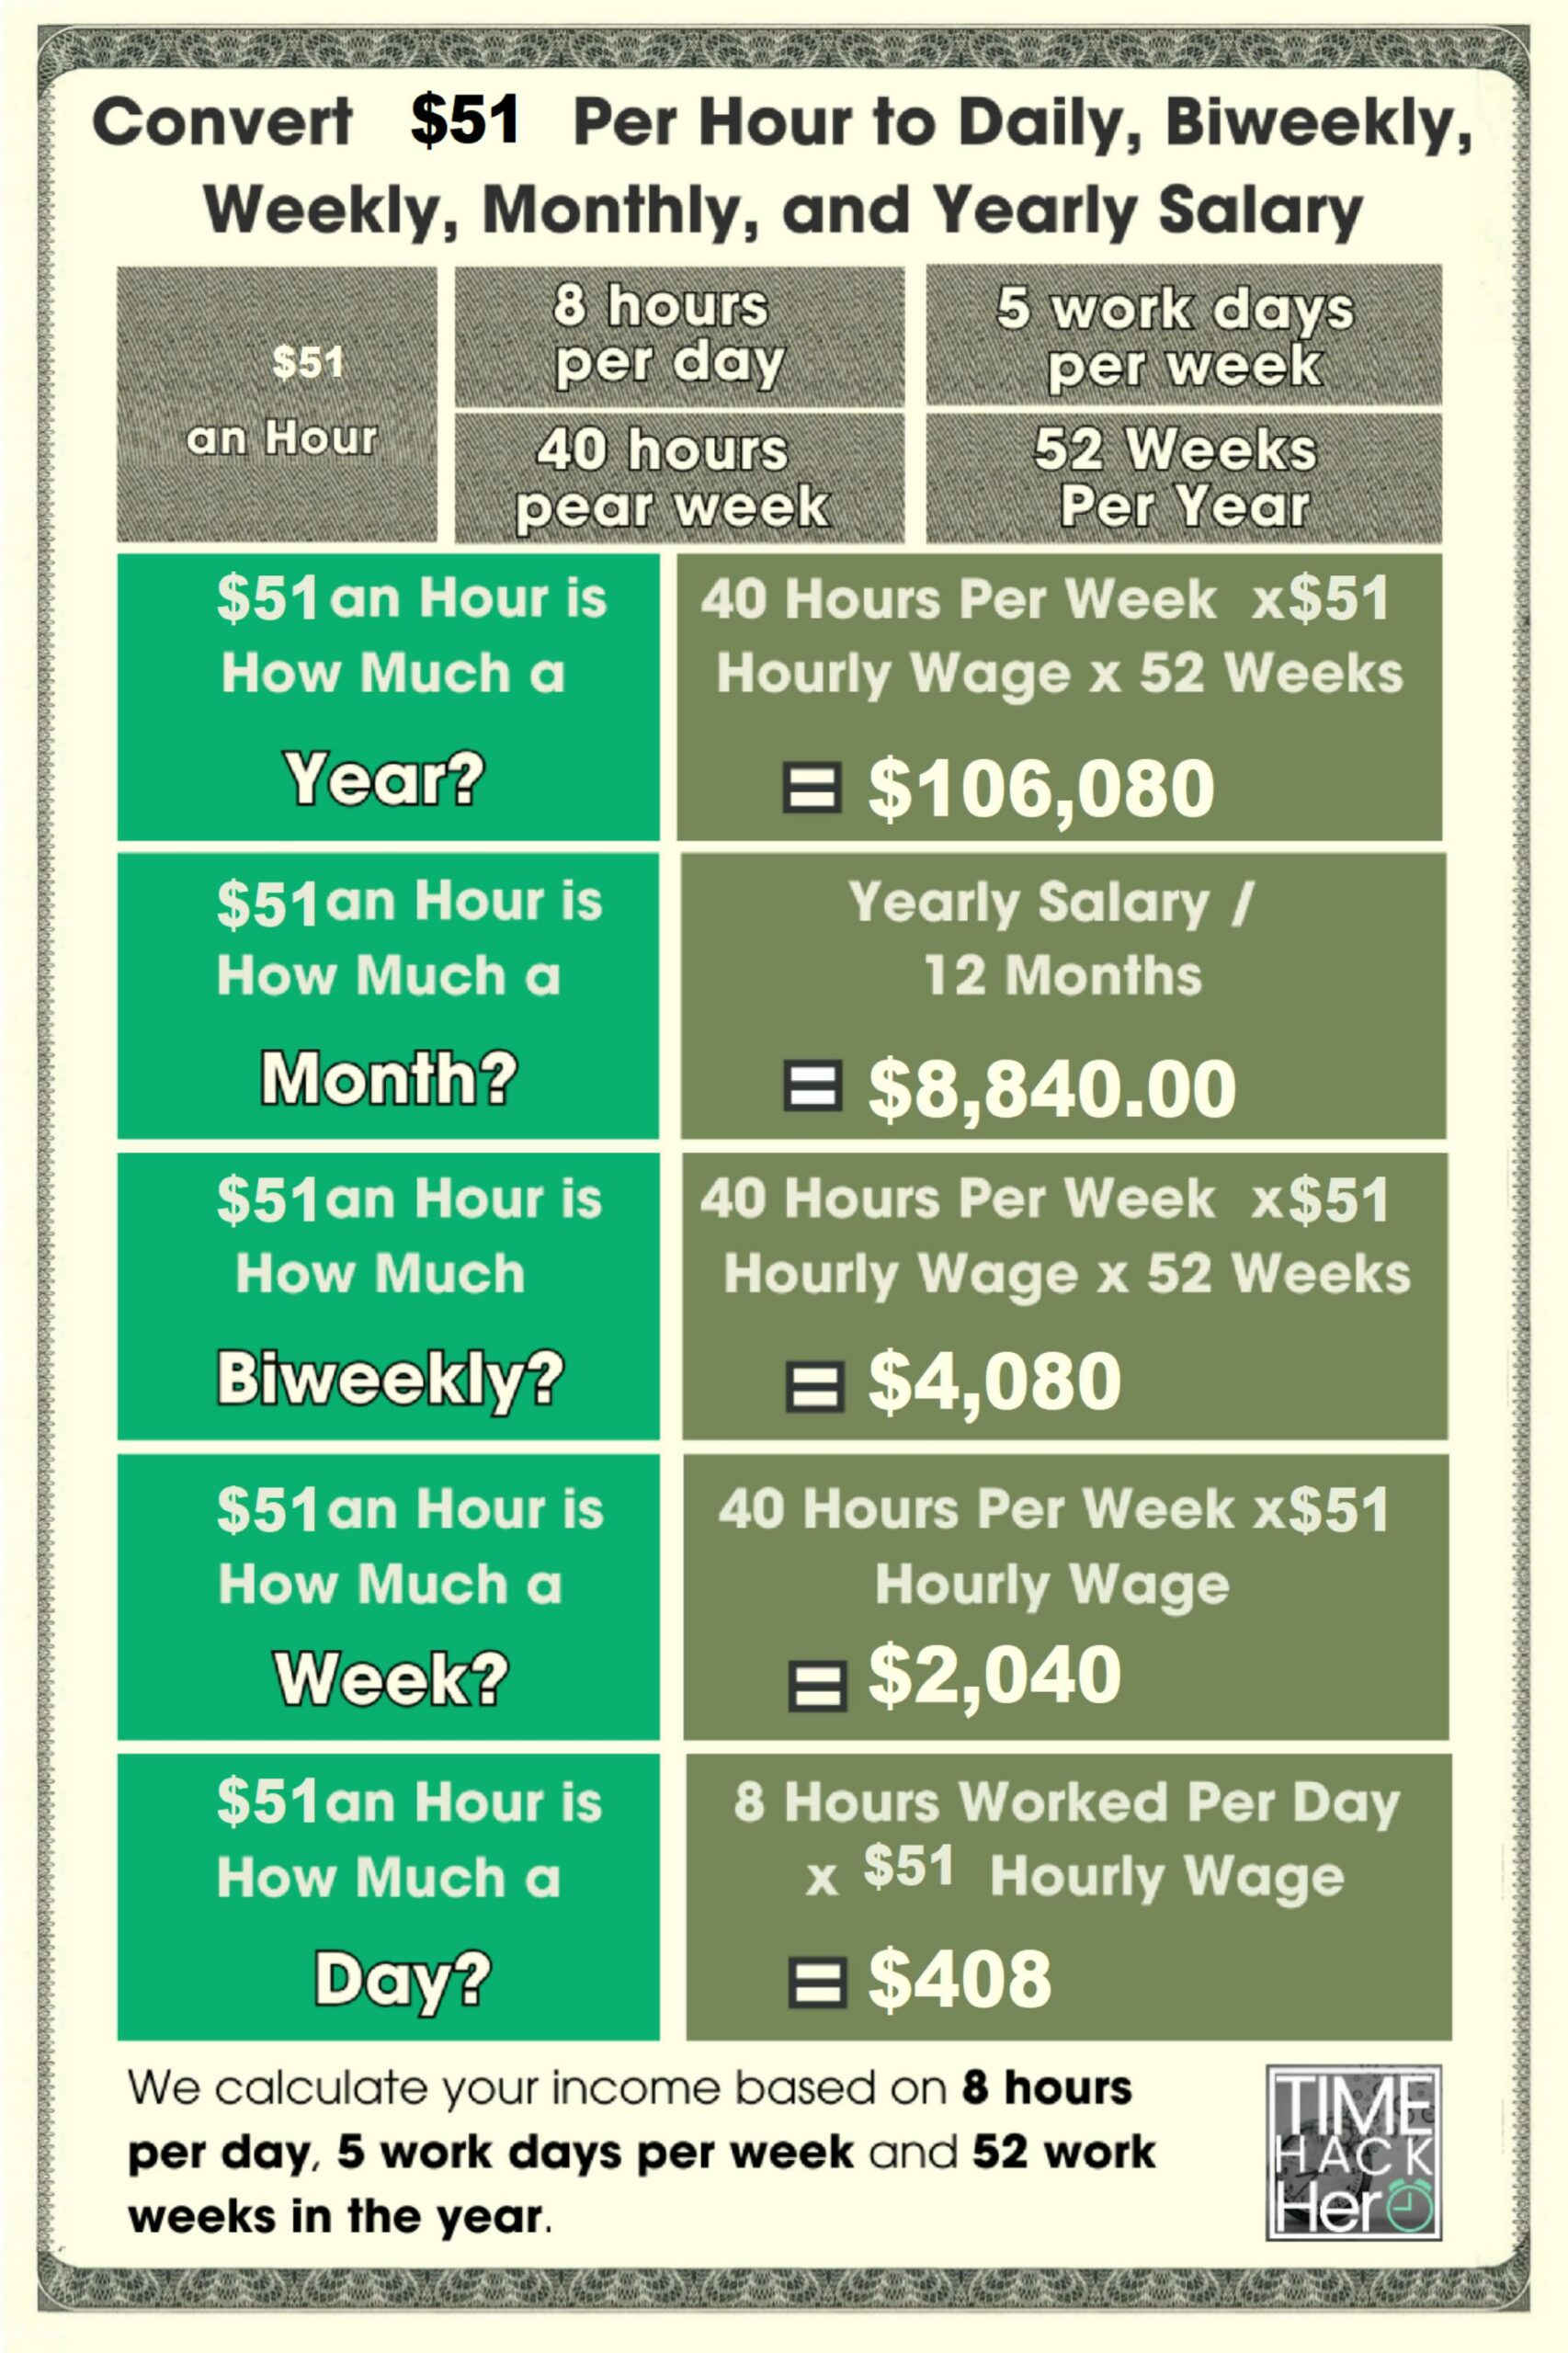 Convert $51 Per Hour to Weekly, Monthly, and Yearly Salary